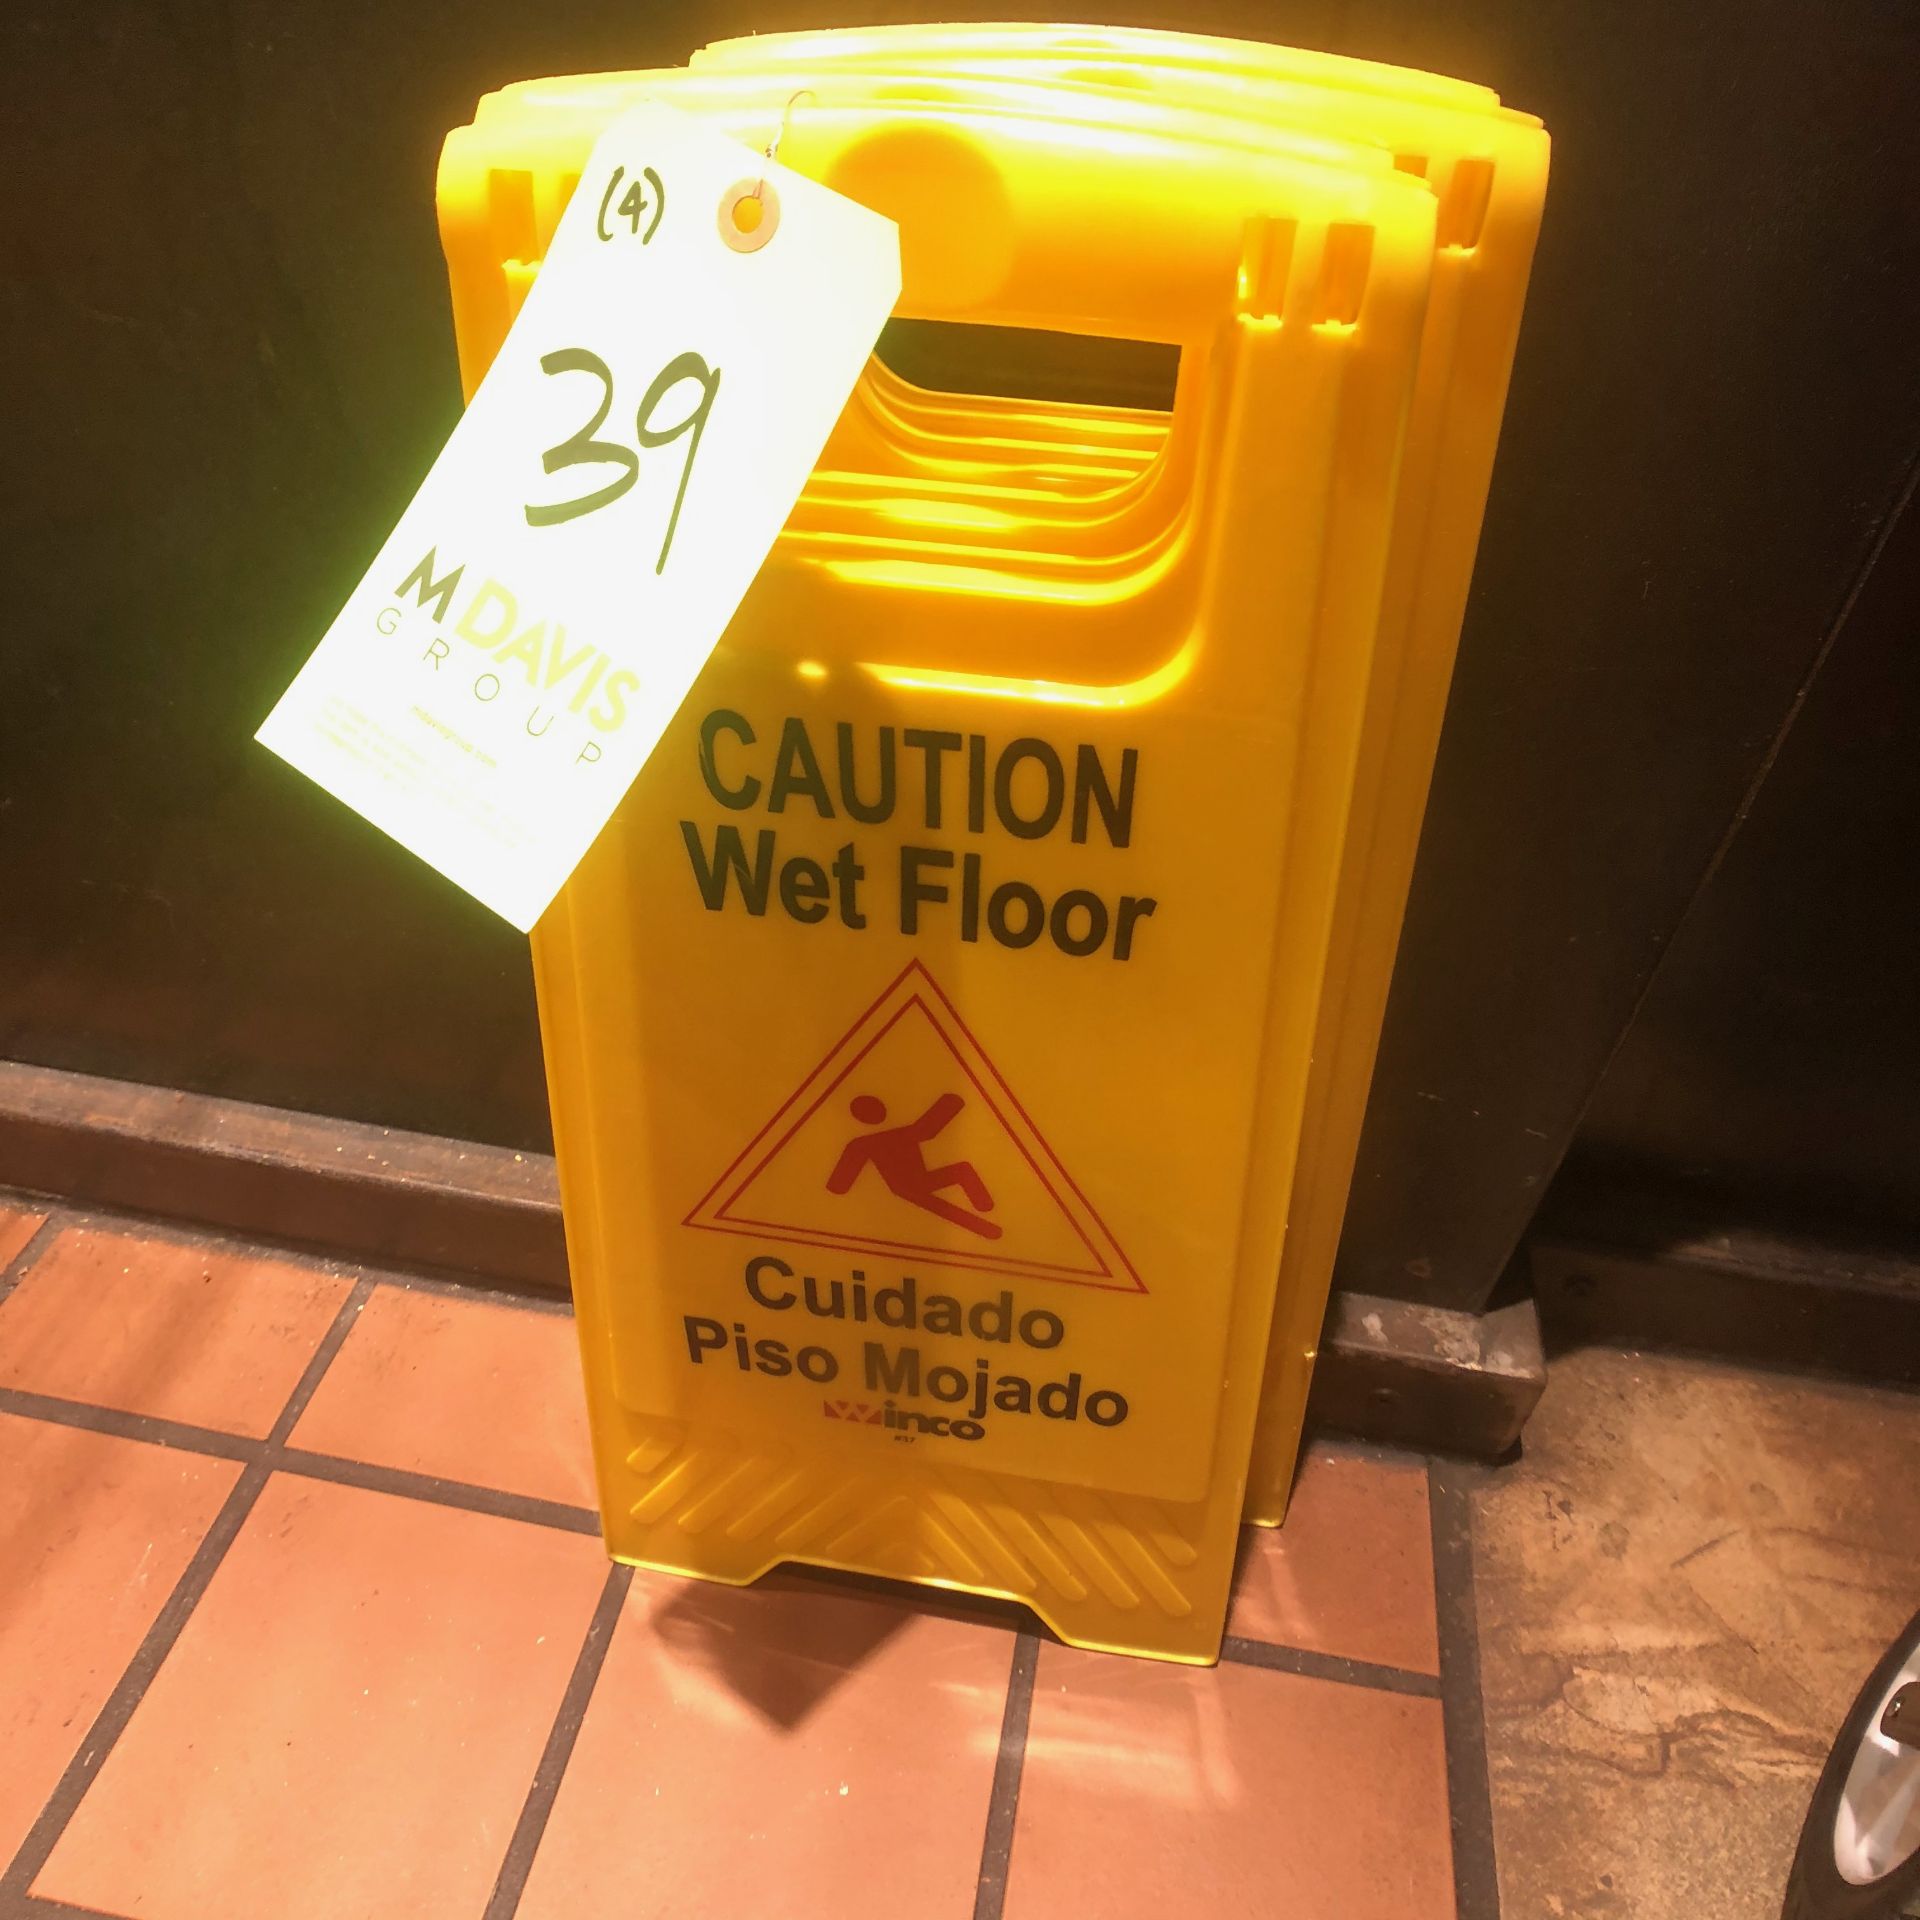 (4) Winco Yellow Caution Wet Floor Signs - Image 2 of 3